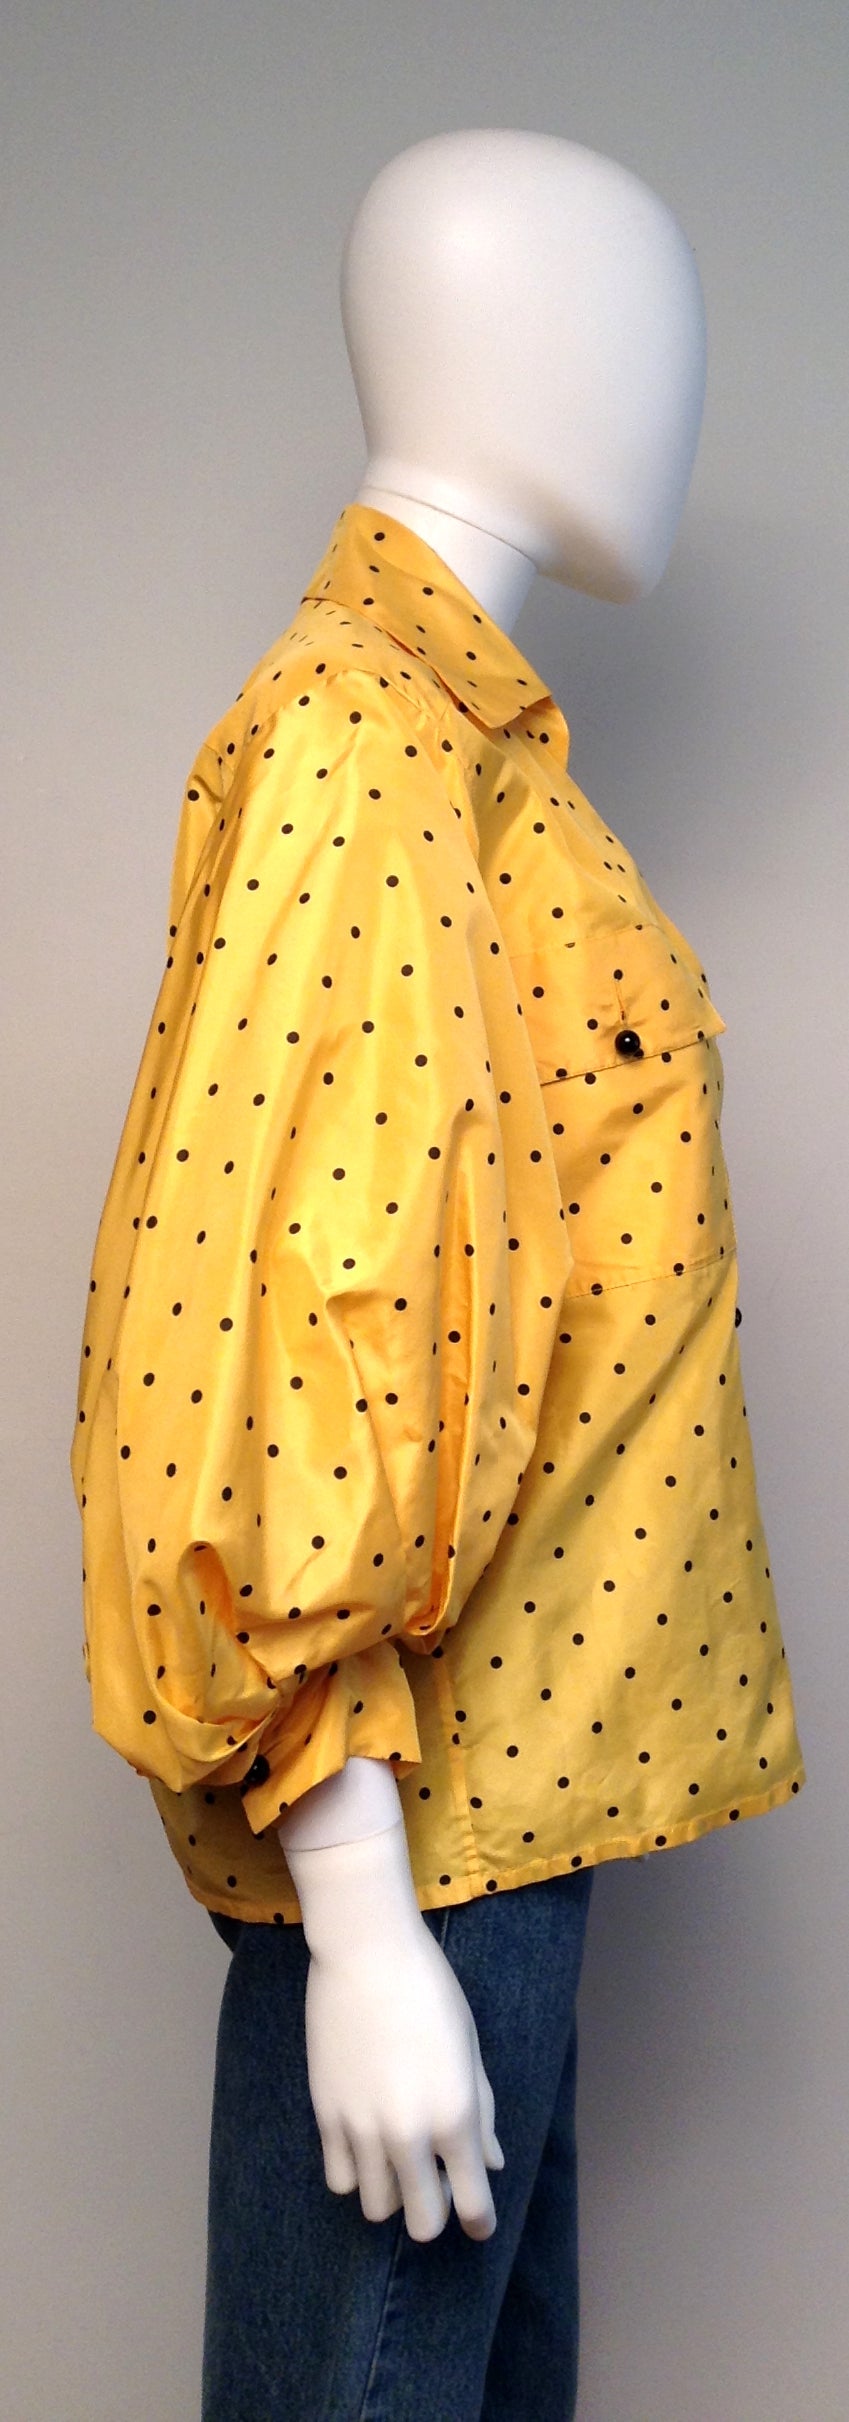 Women's Christian Dior Vintage Yellow and Black Polka Dot Blouse Size 36 For Sale